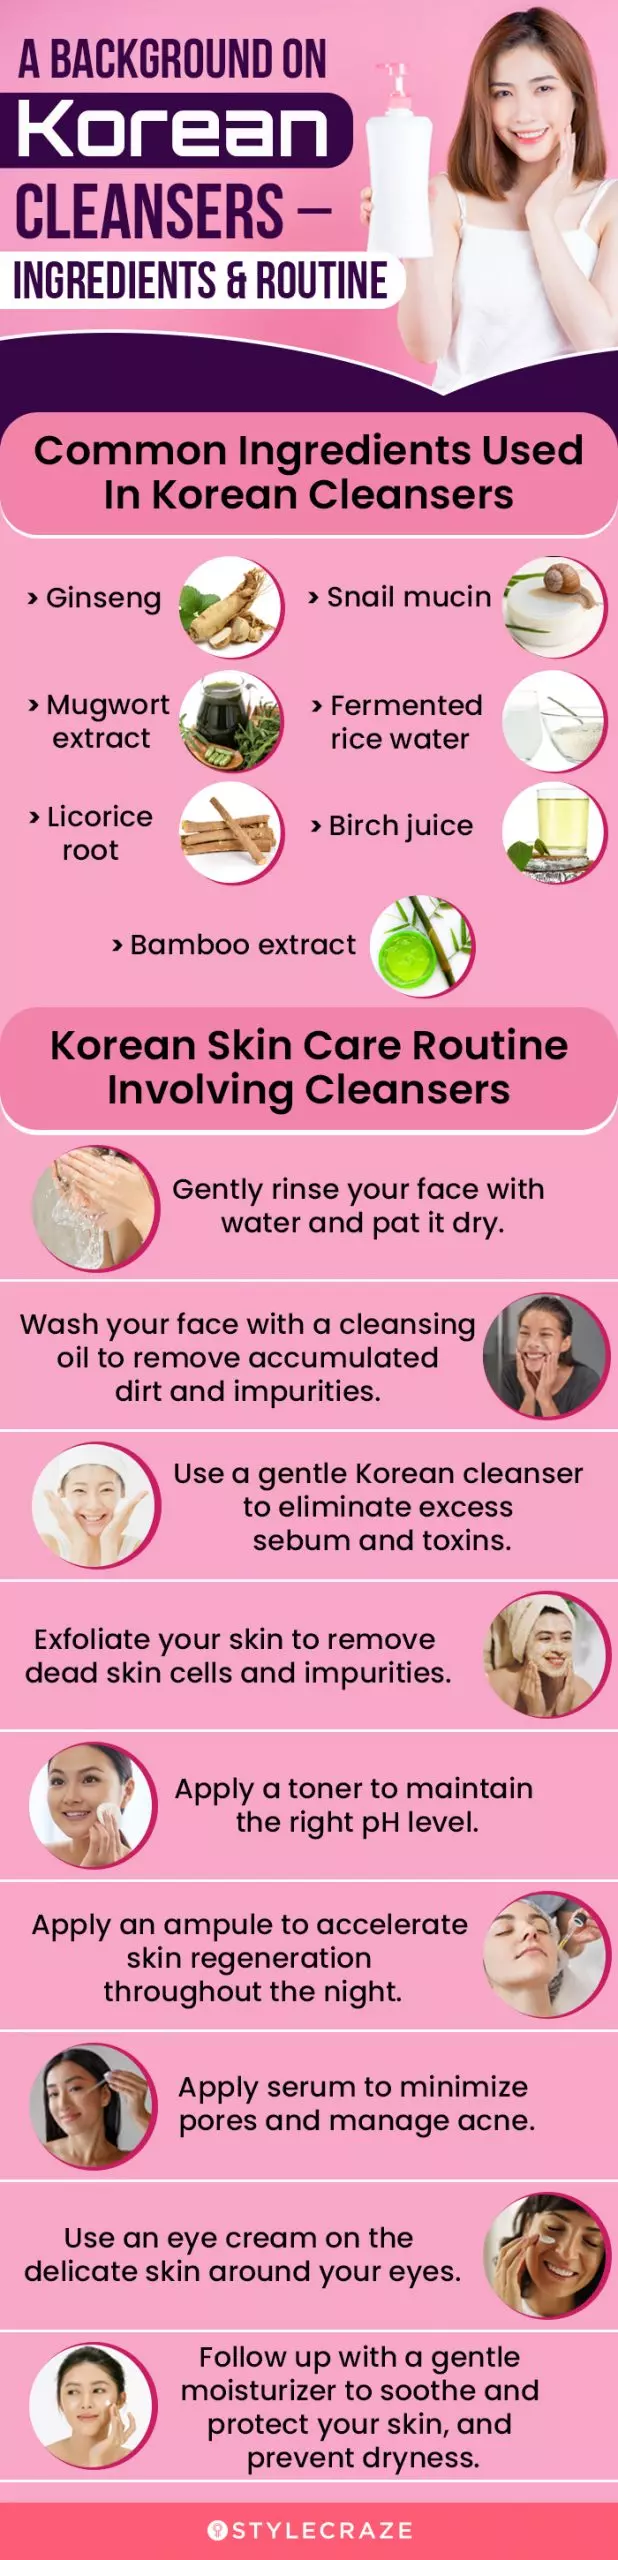 Korean Cleansers & Routine (infographic)